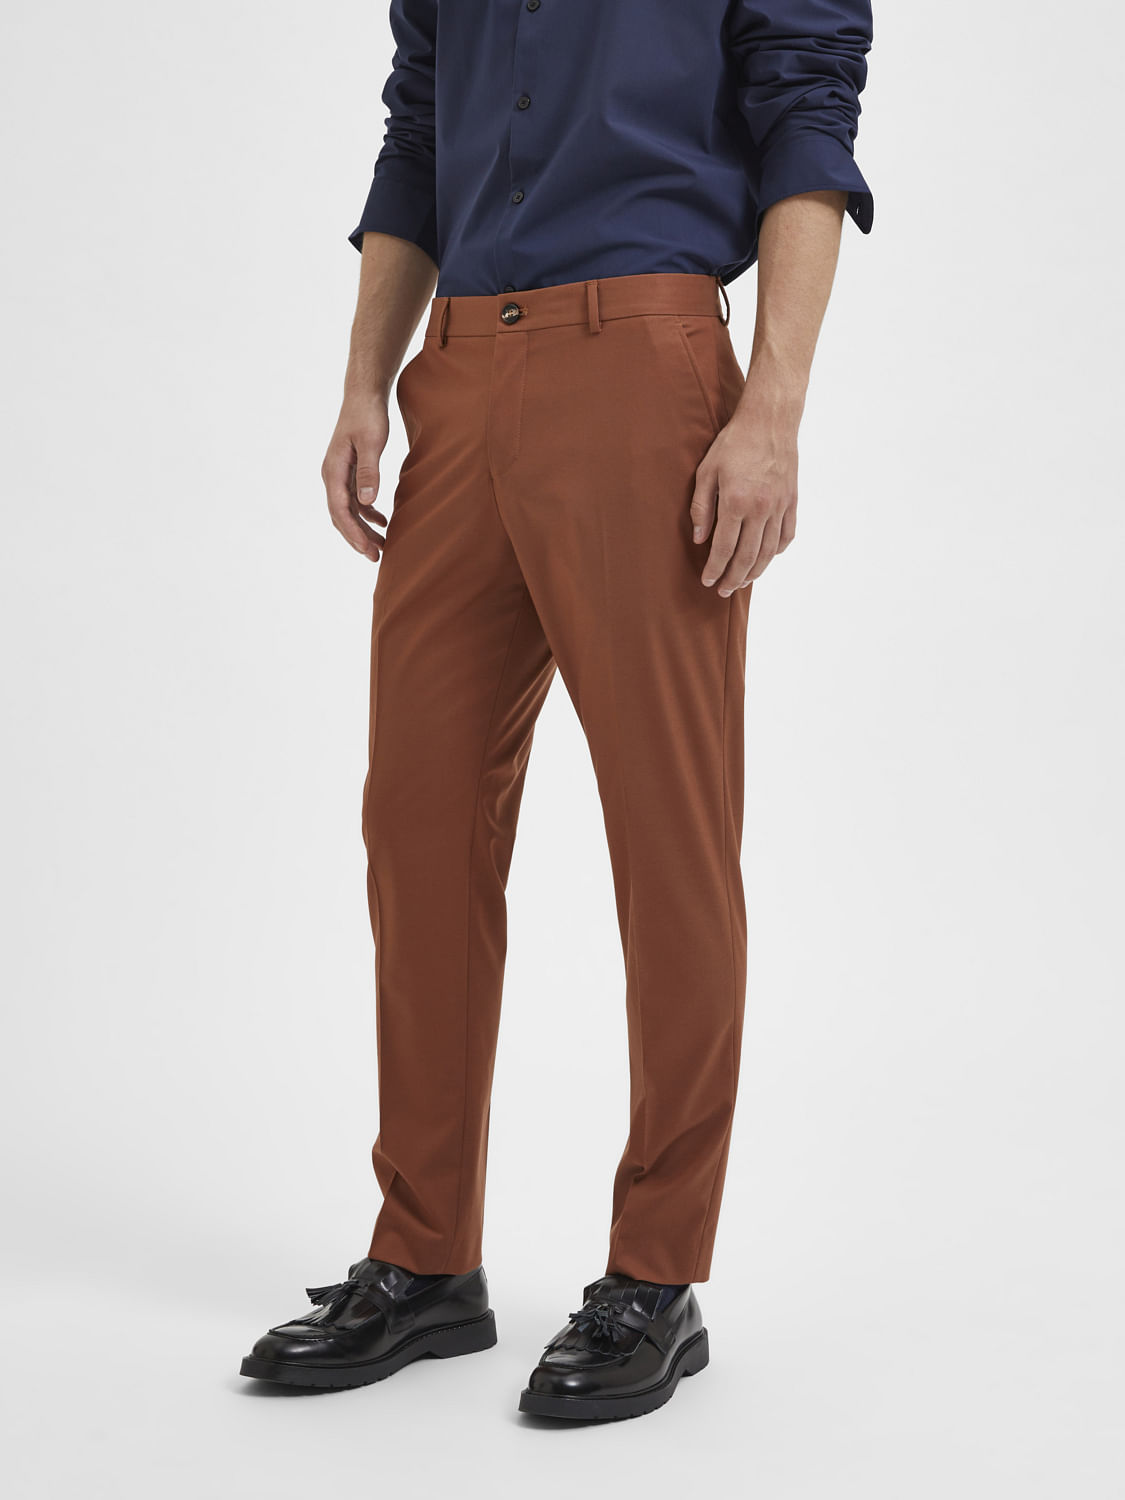 Buy Textured Tapered Fit FlatFront Trousers Online at Best Prices in India   JioMart